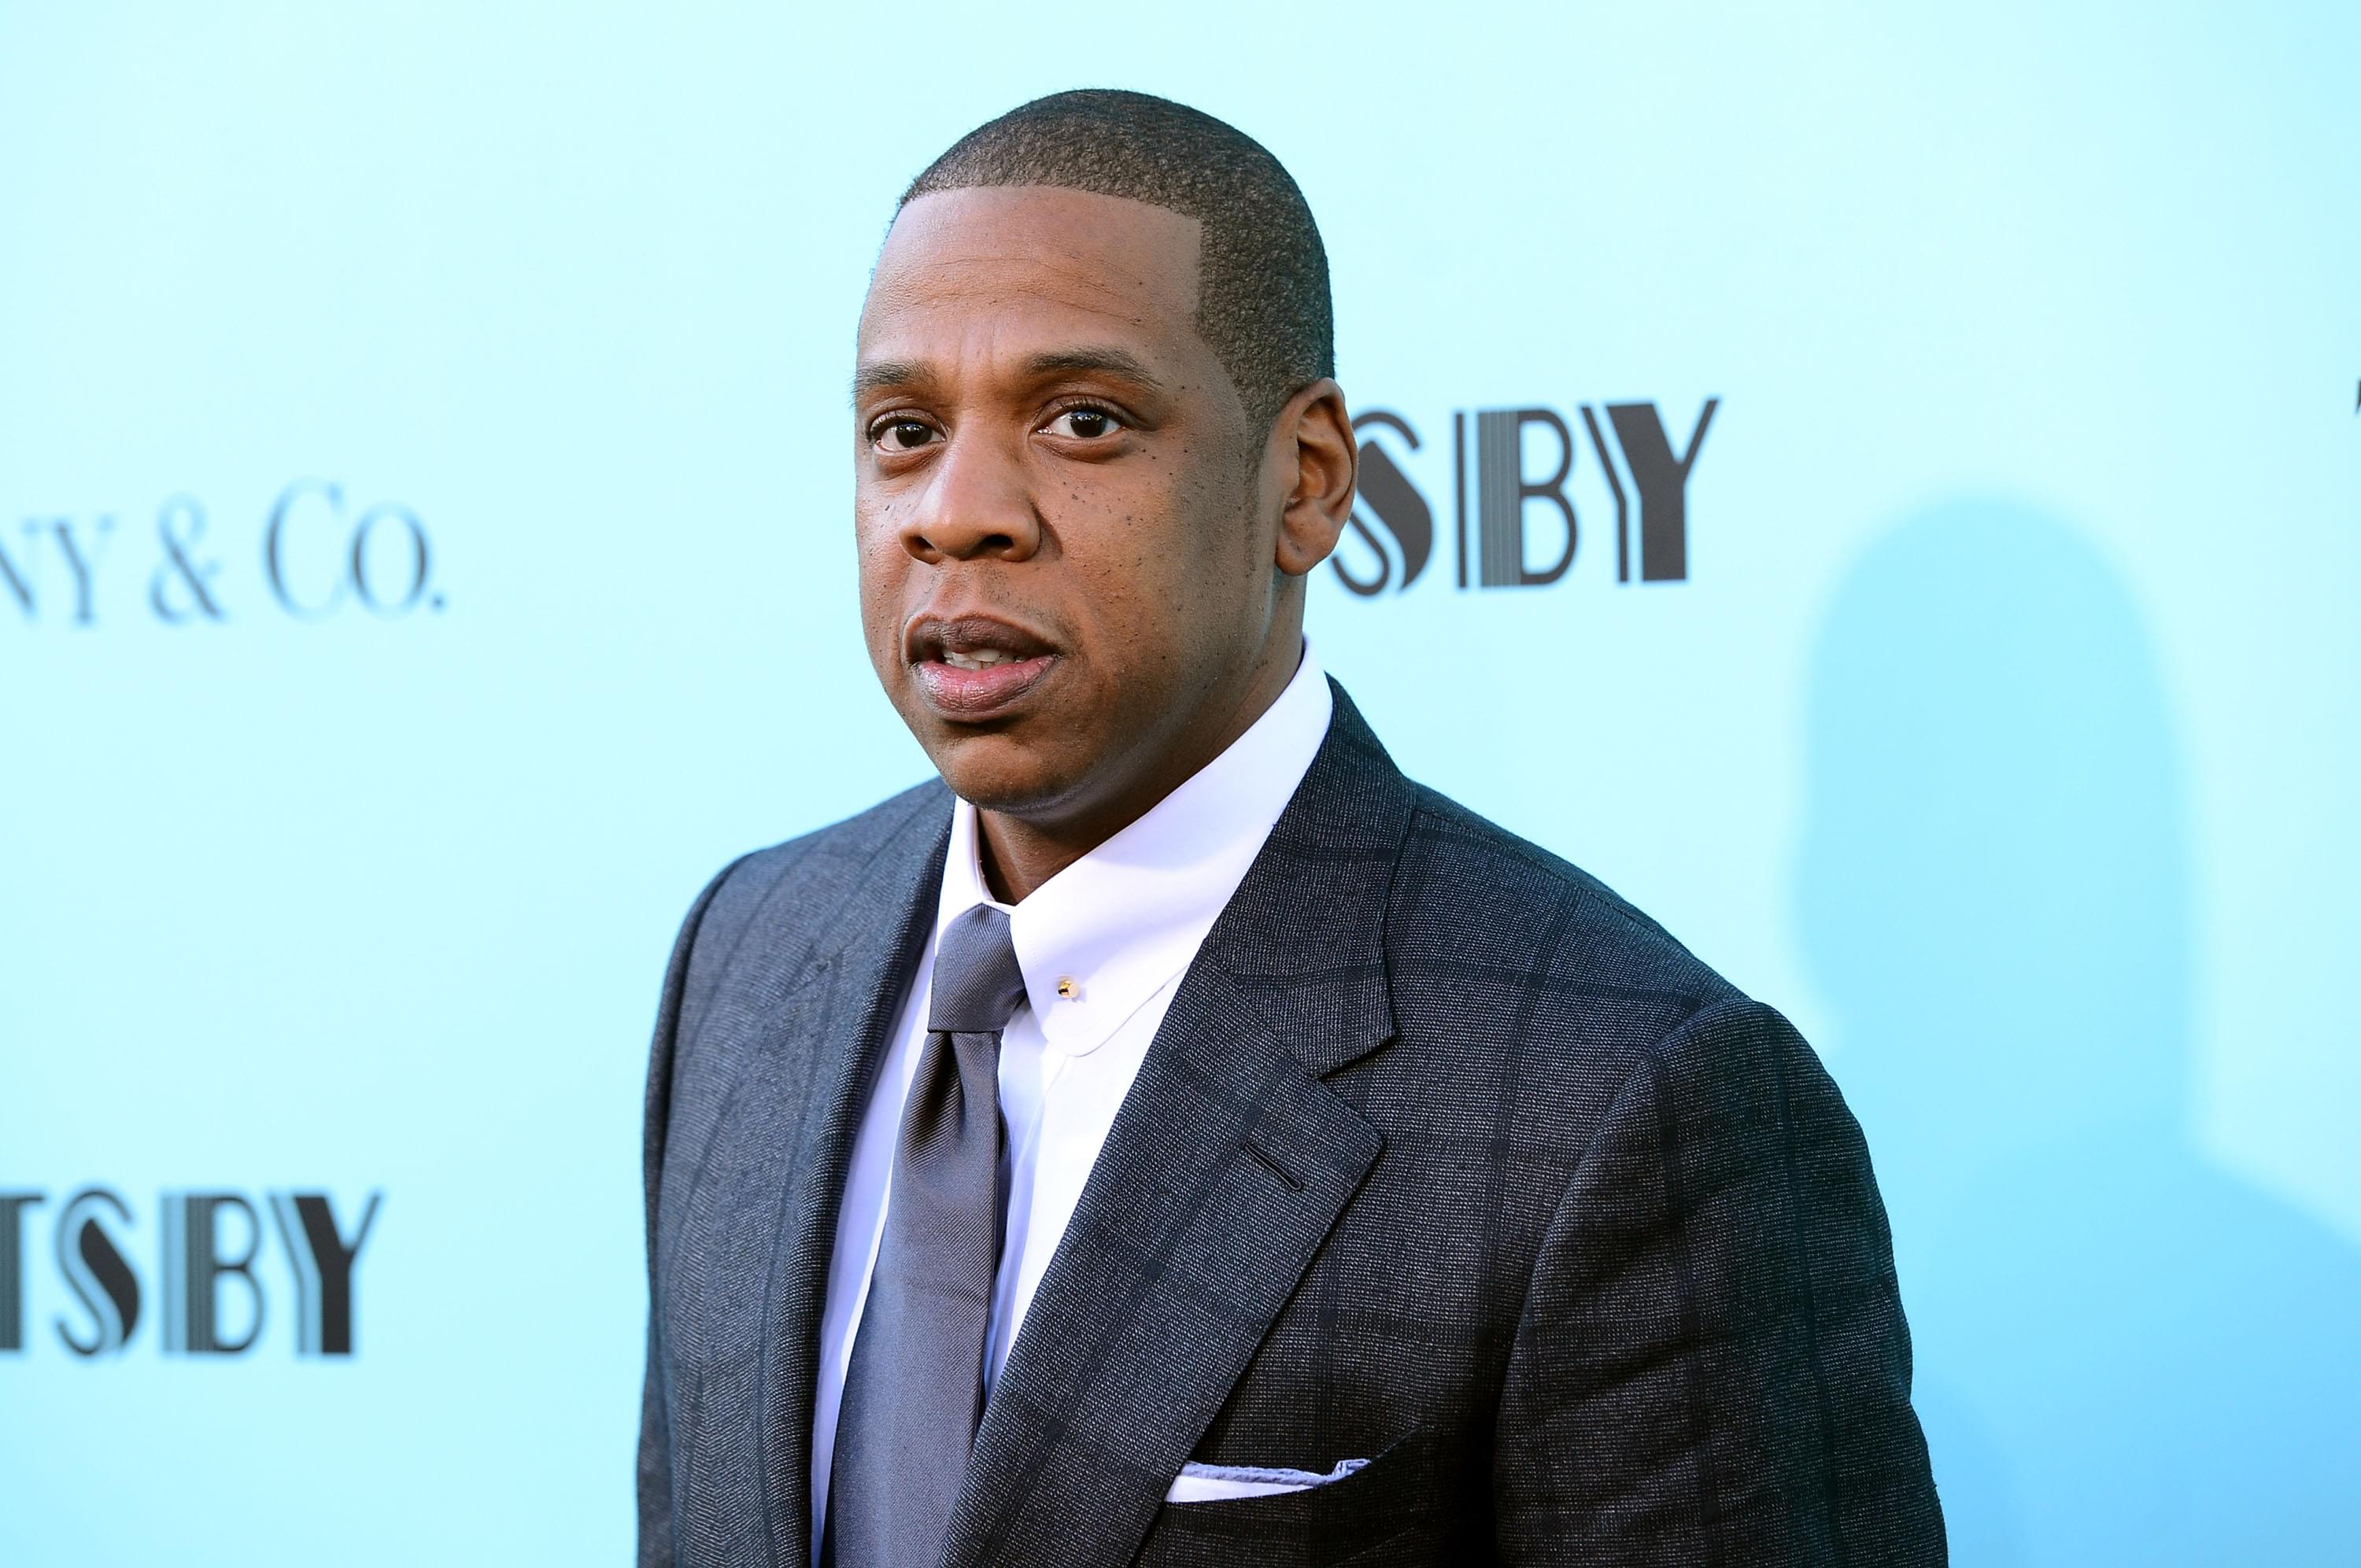 Jay Z Announced Release Date For New Album, ‘4:44’